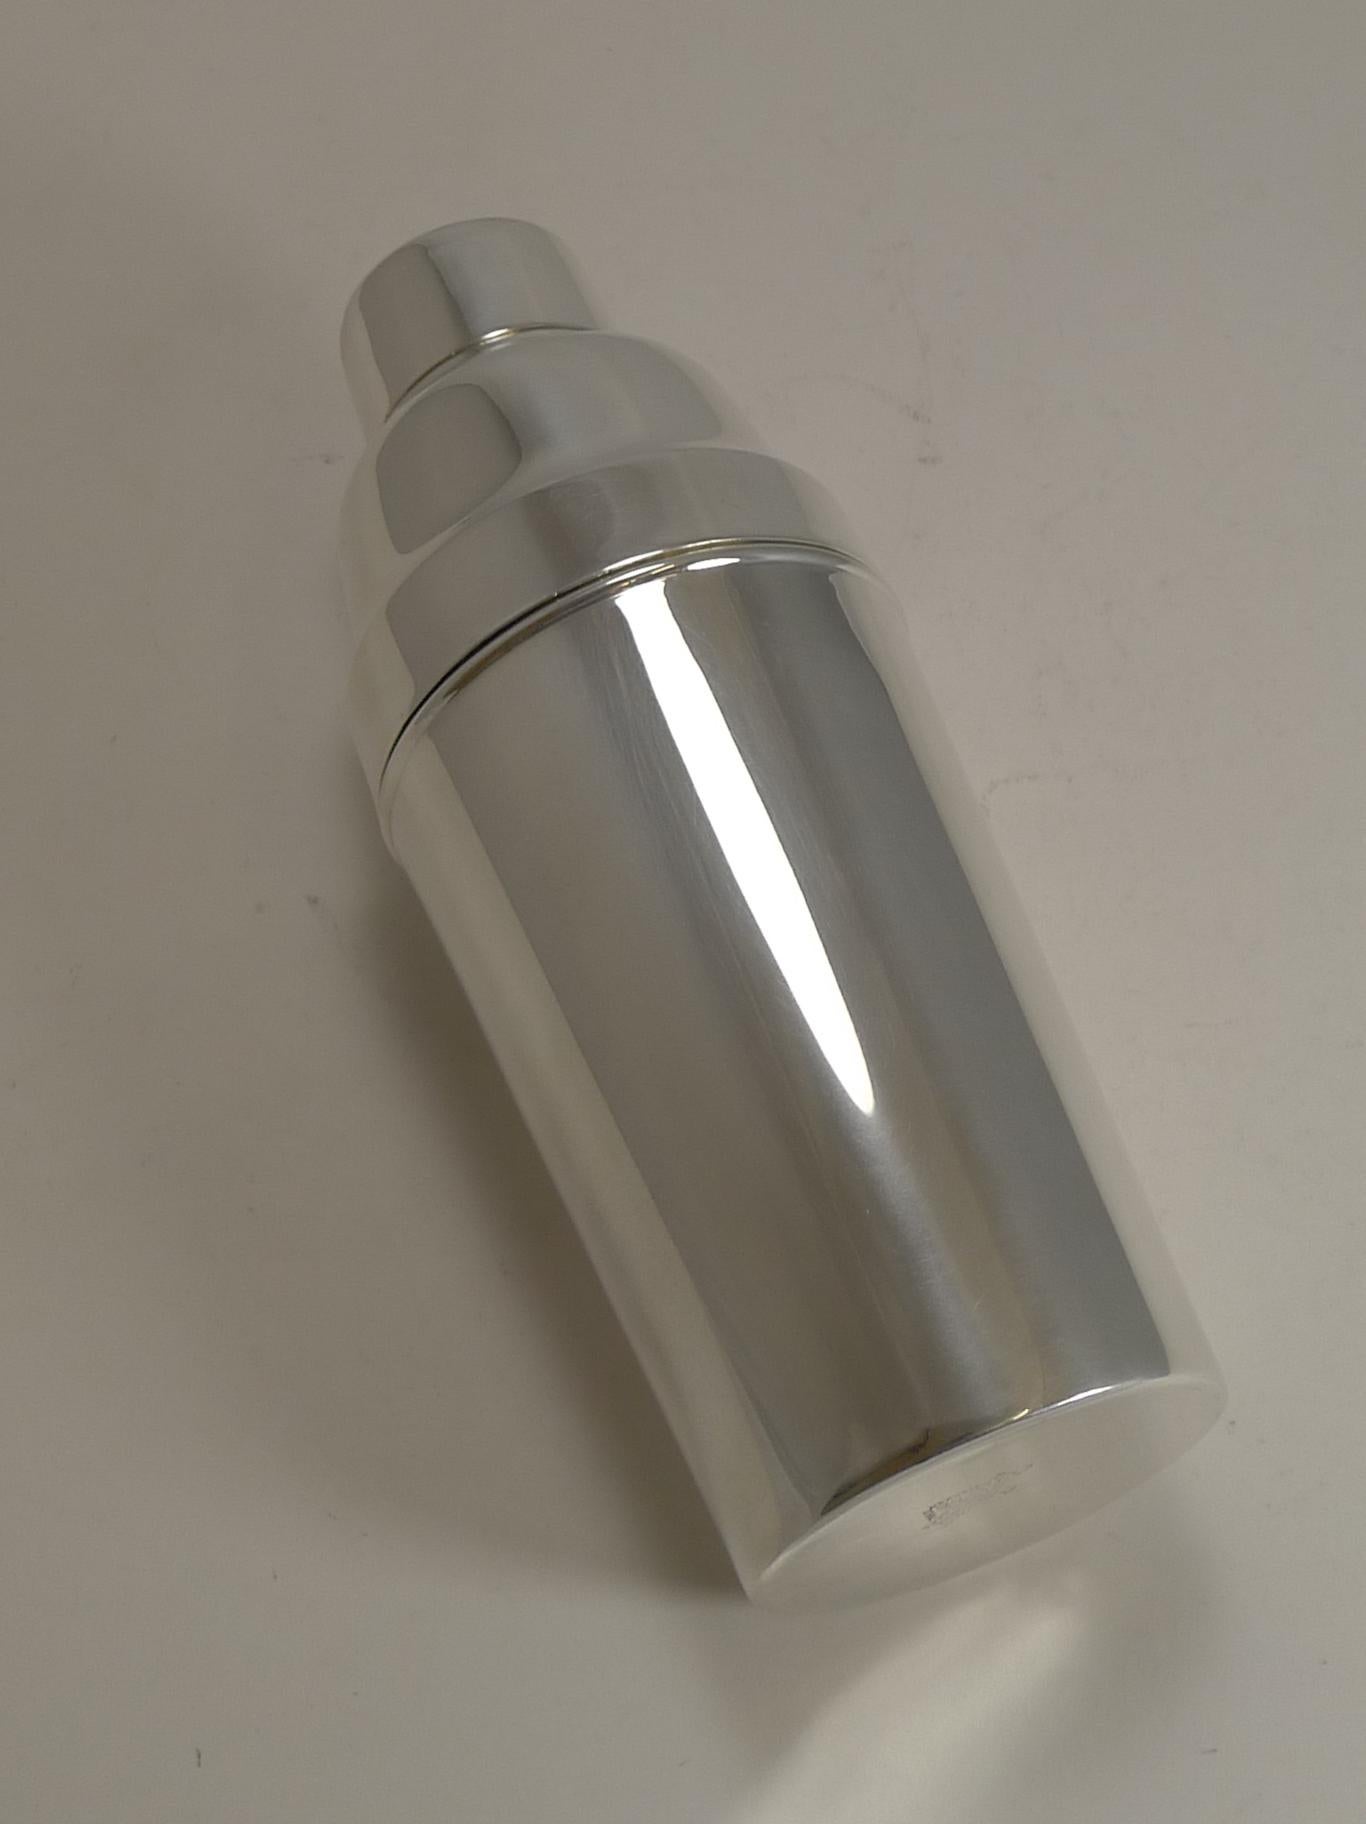 A handsome English silver plated cocktail shaker made by the top-notch silversmith, Mappin and Webb; fully marked on the underside.

Dating to circa 1930, it remains in excellent condition measuring 3 3/8